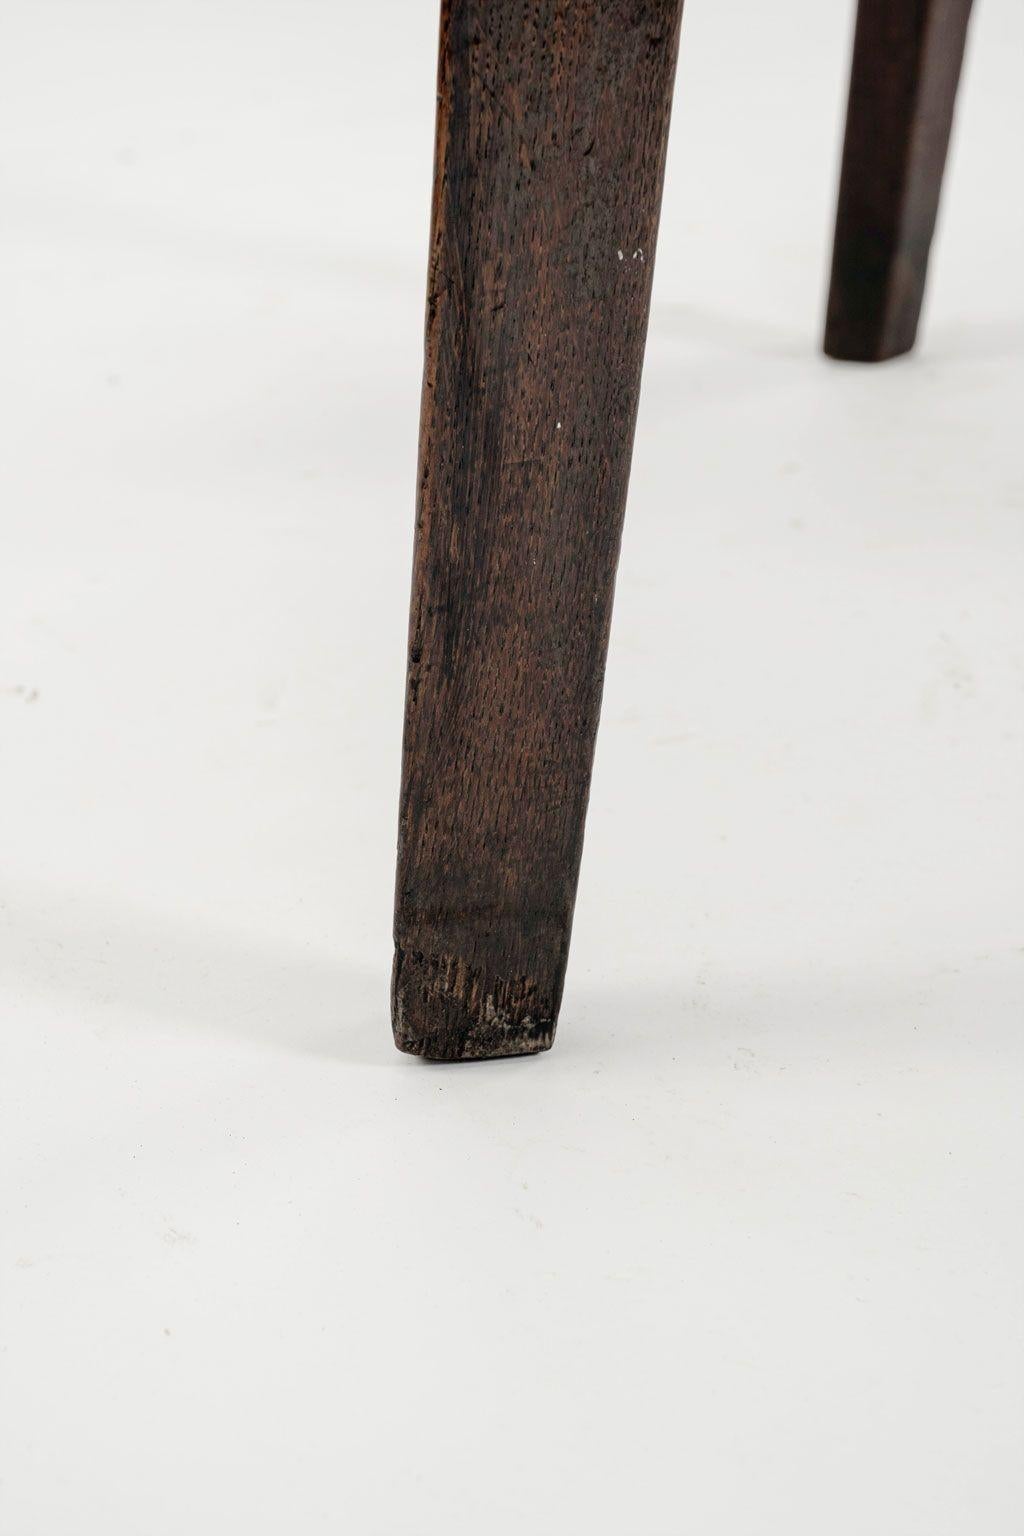 Georgian cricket table in oak on simple tapered legs. Dates to late 18th century. Hand-carved with mortise and tenon construction.

Note: Regional differences in humidity and climate during shipping may cause antique and vintage wood to shrink